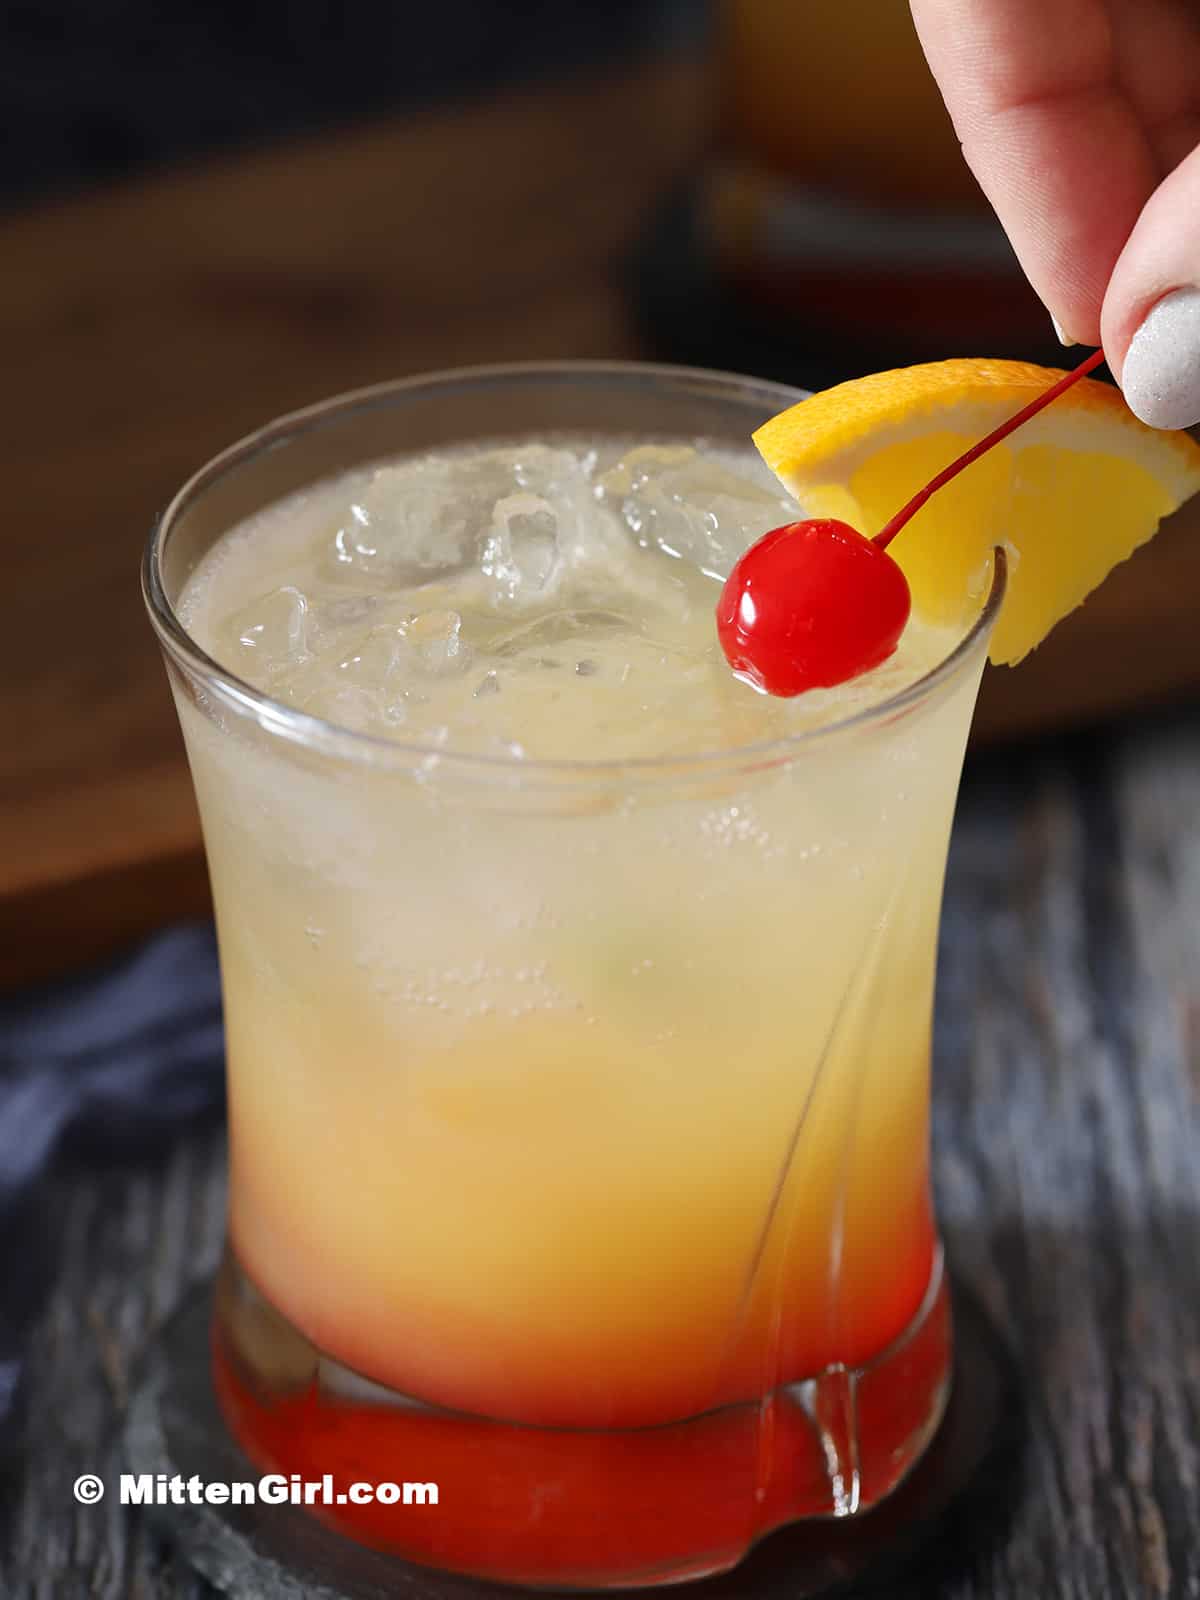 A hand placing garnish on the side of a glass filled with mocktail.  